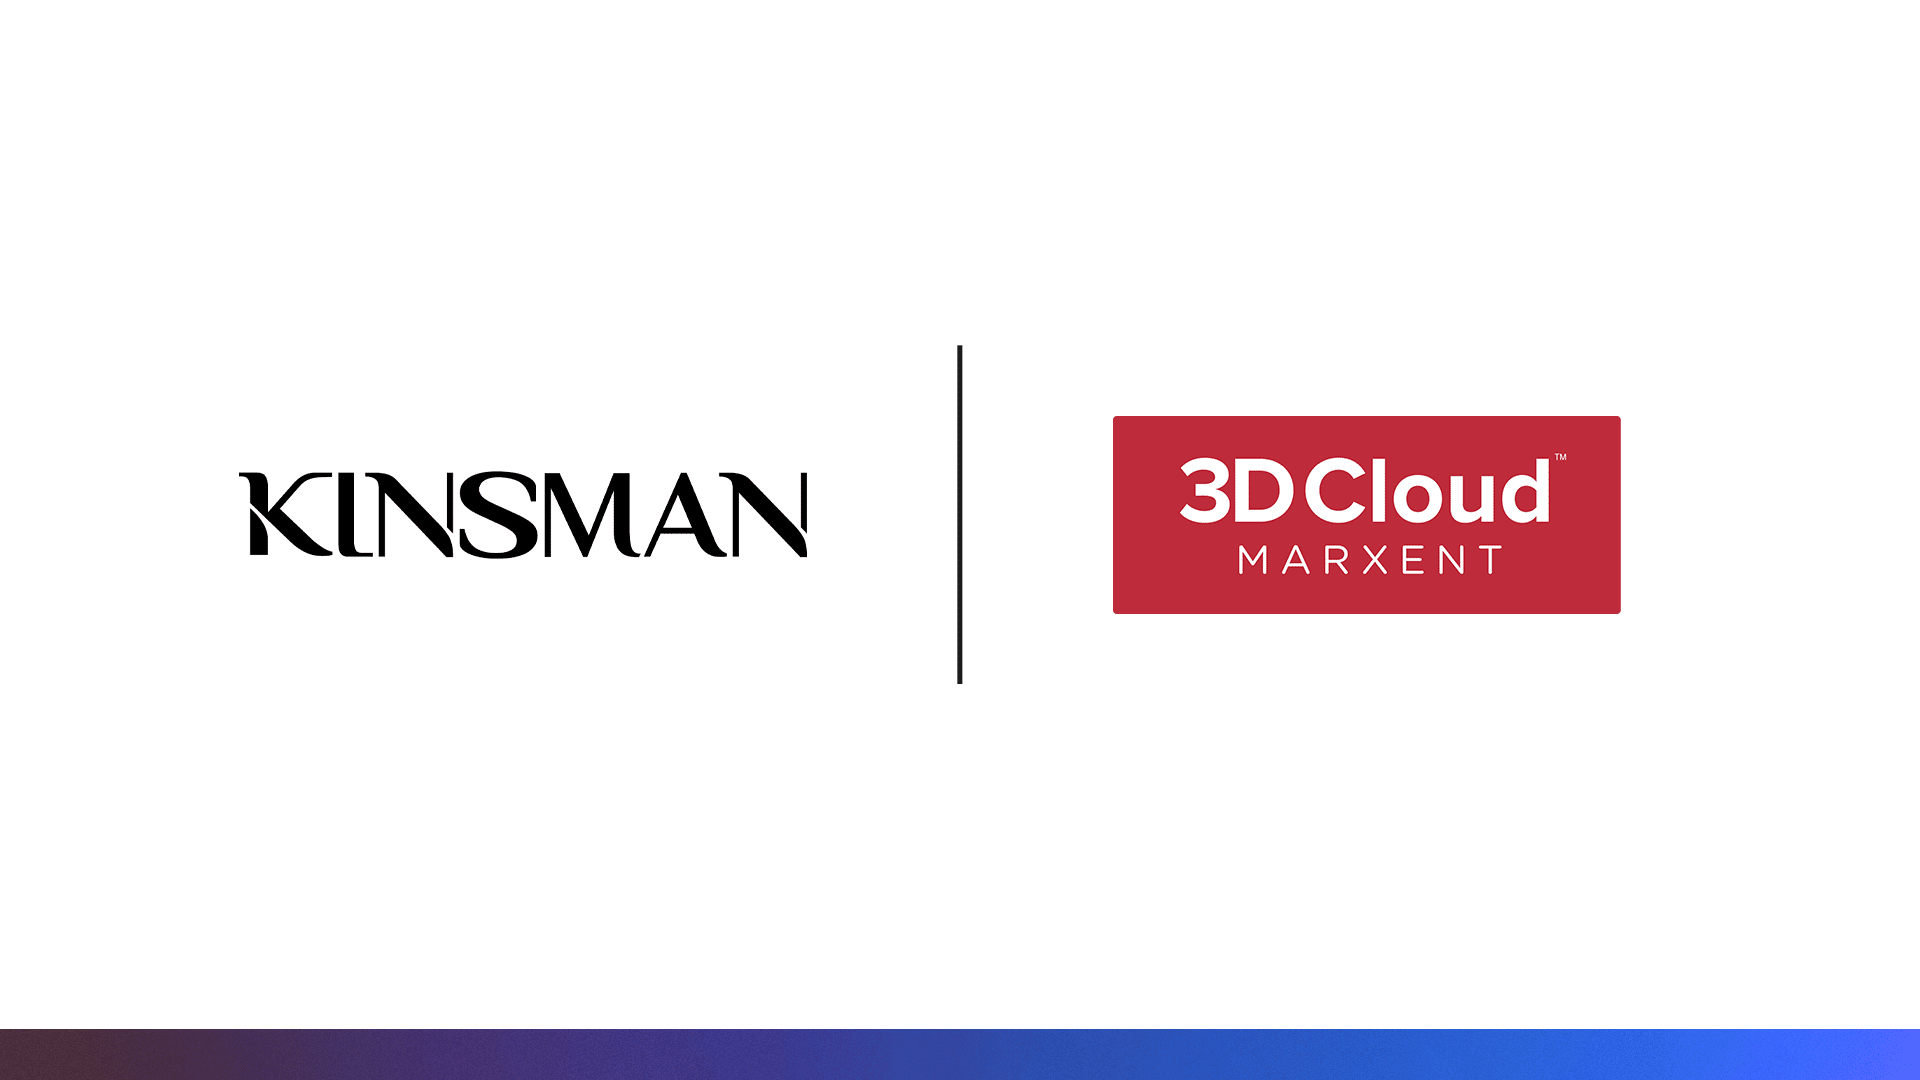 Kinsman partners with 3D Cloud by Marxent